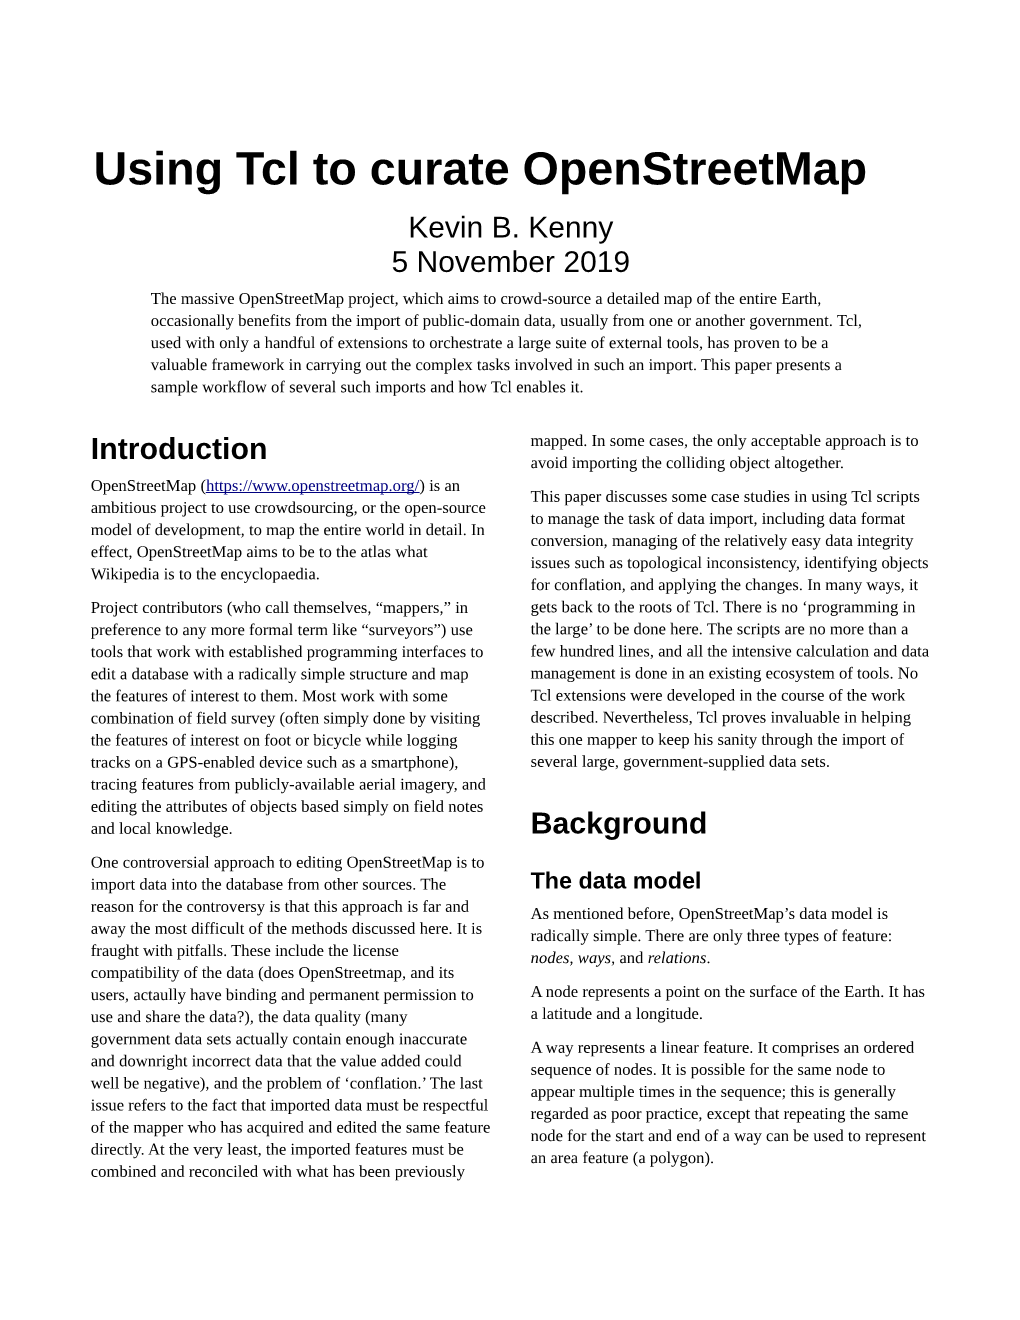 Using Tcl to Curate Openstreetmap Kevin B